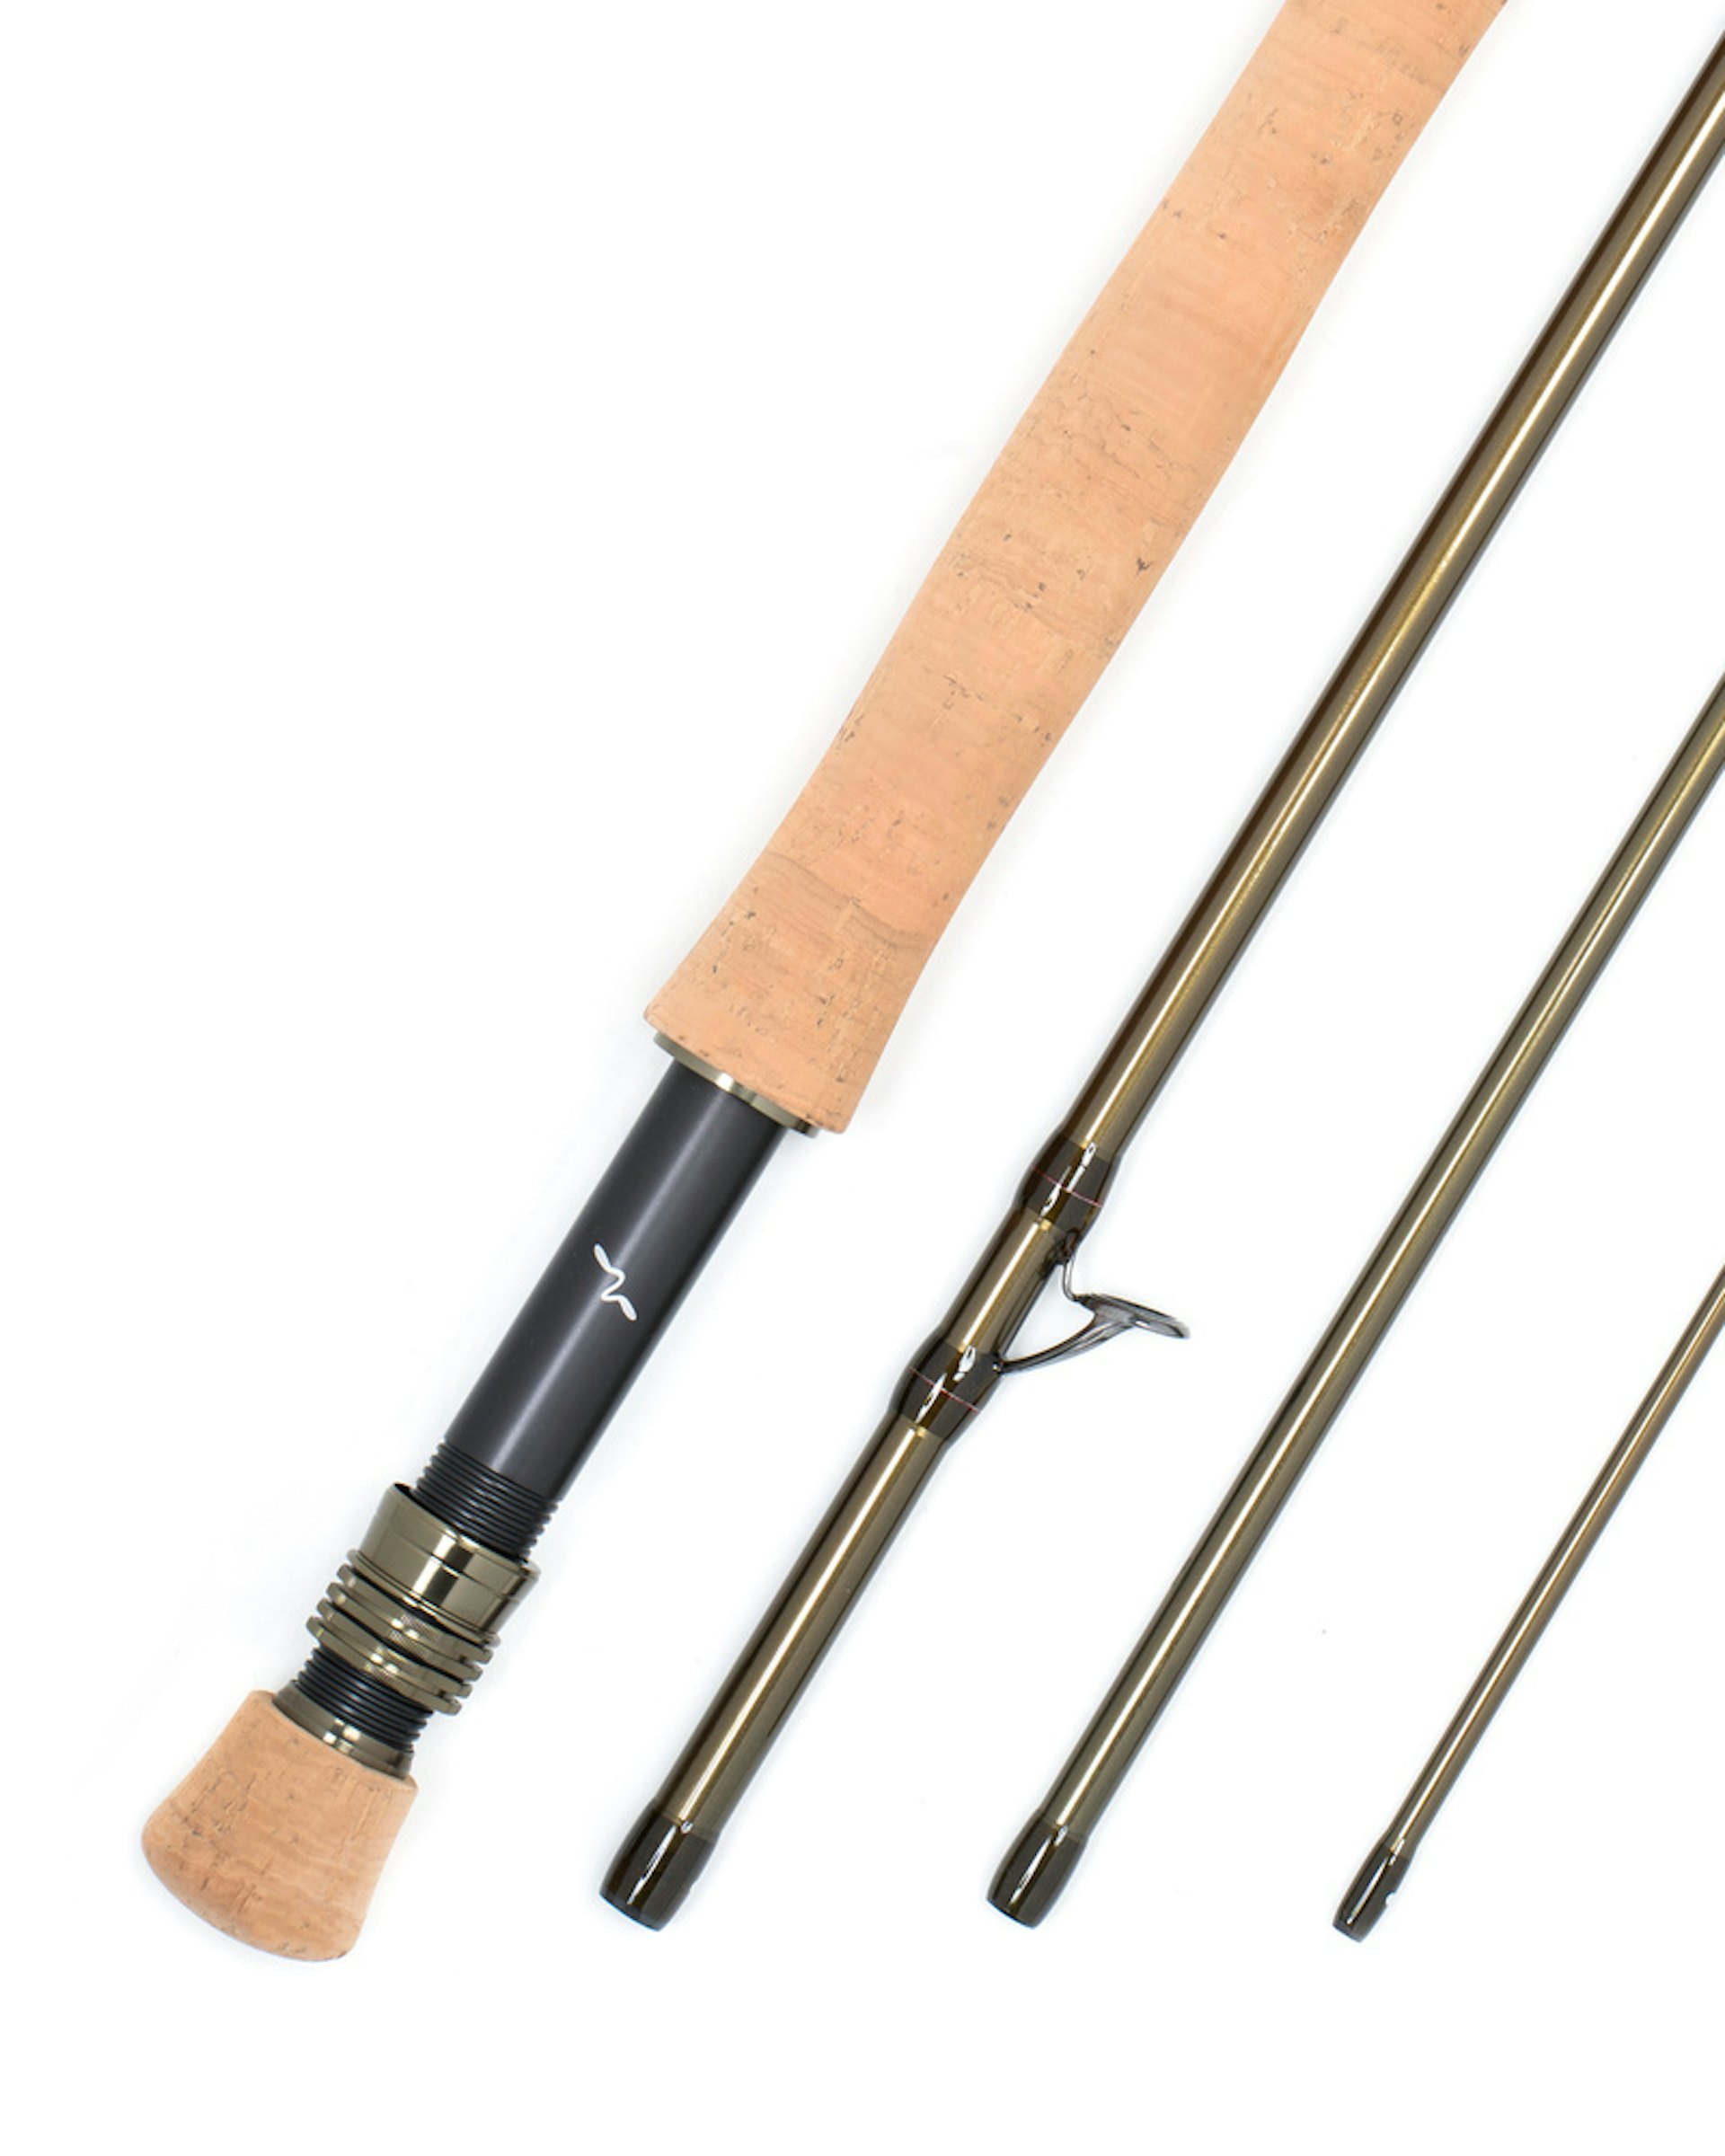 Single Hand Fly Rods - Fly fishing - Trout fly fishing